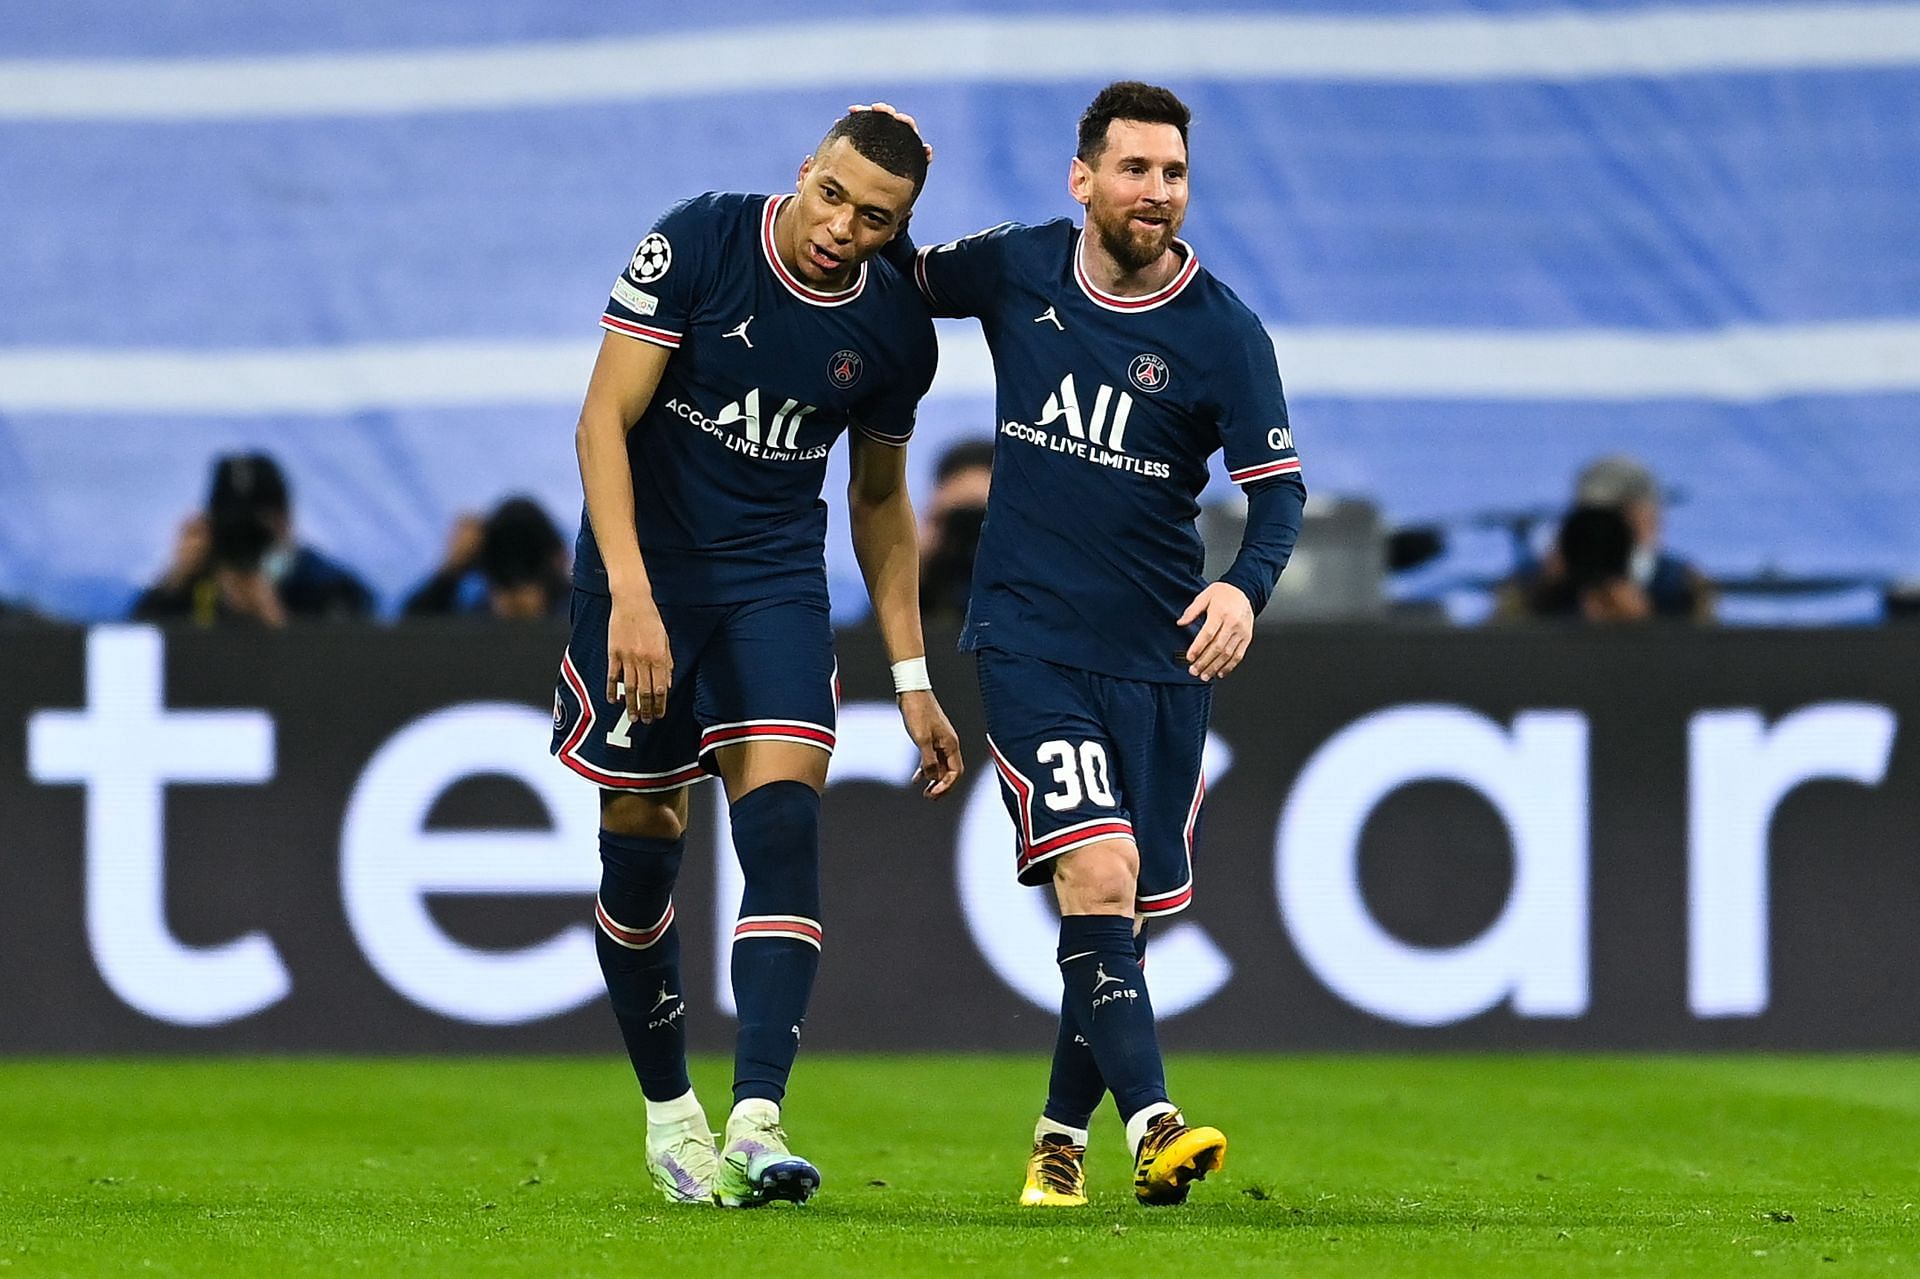 Montpellier vs PSG Prediction and Betting Tips - 1st February 2023